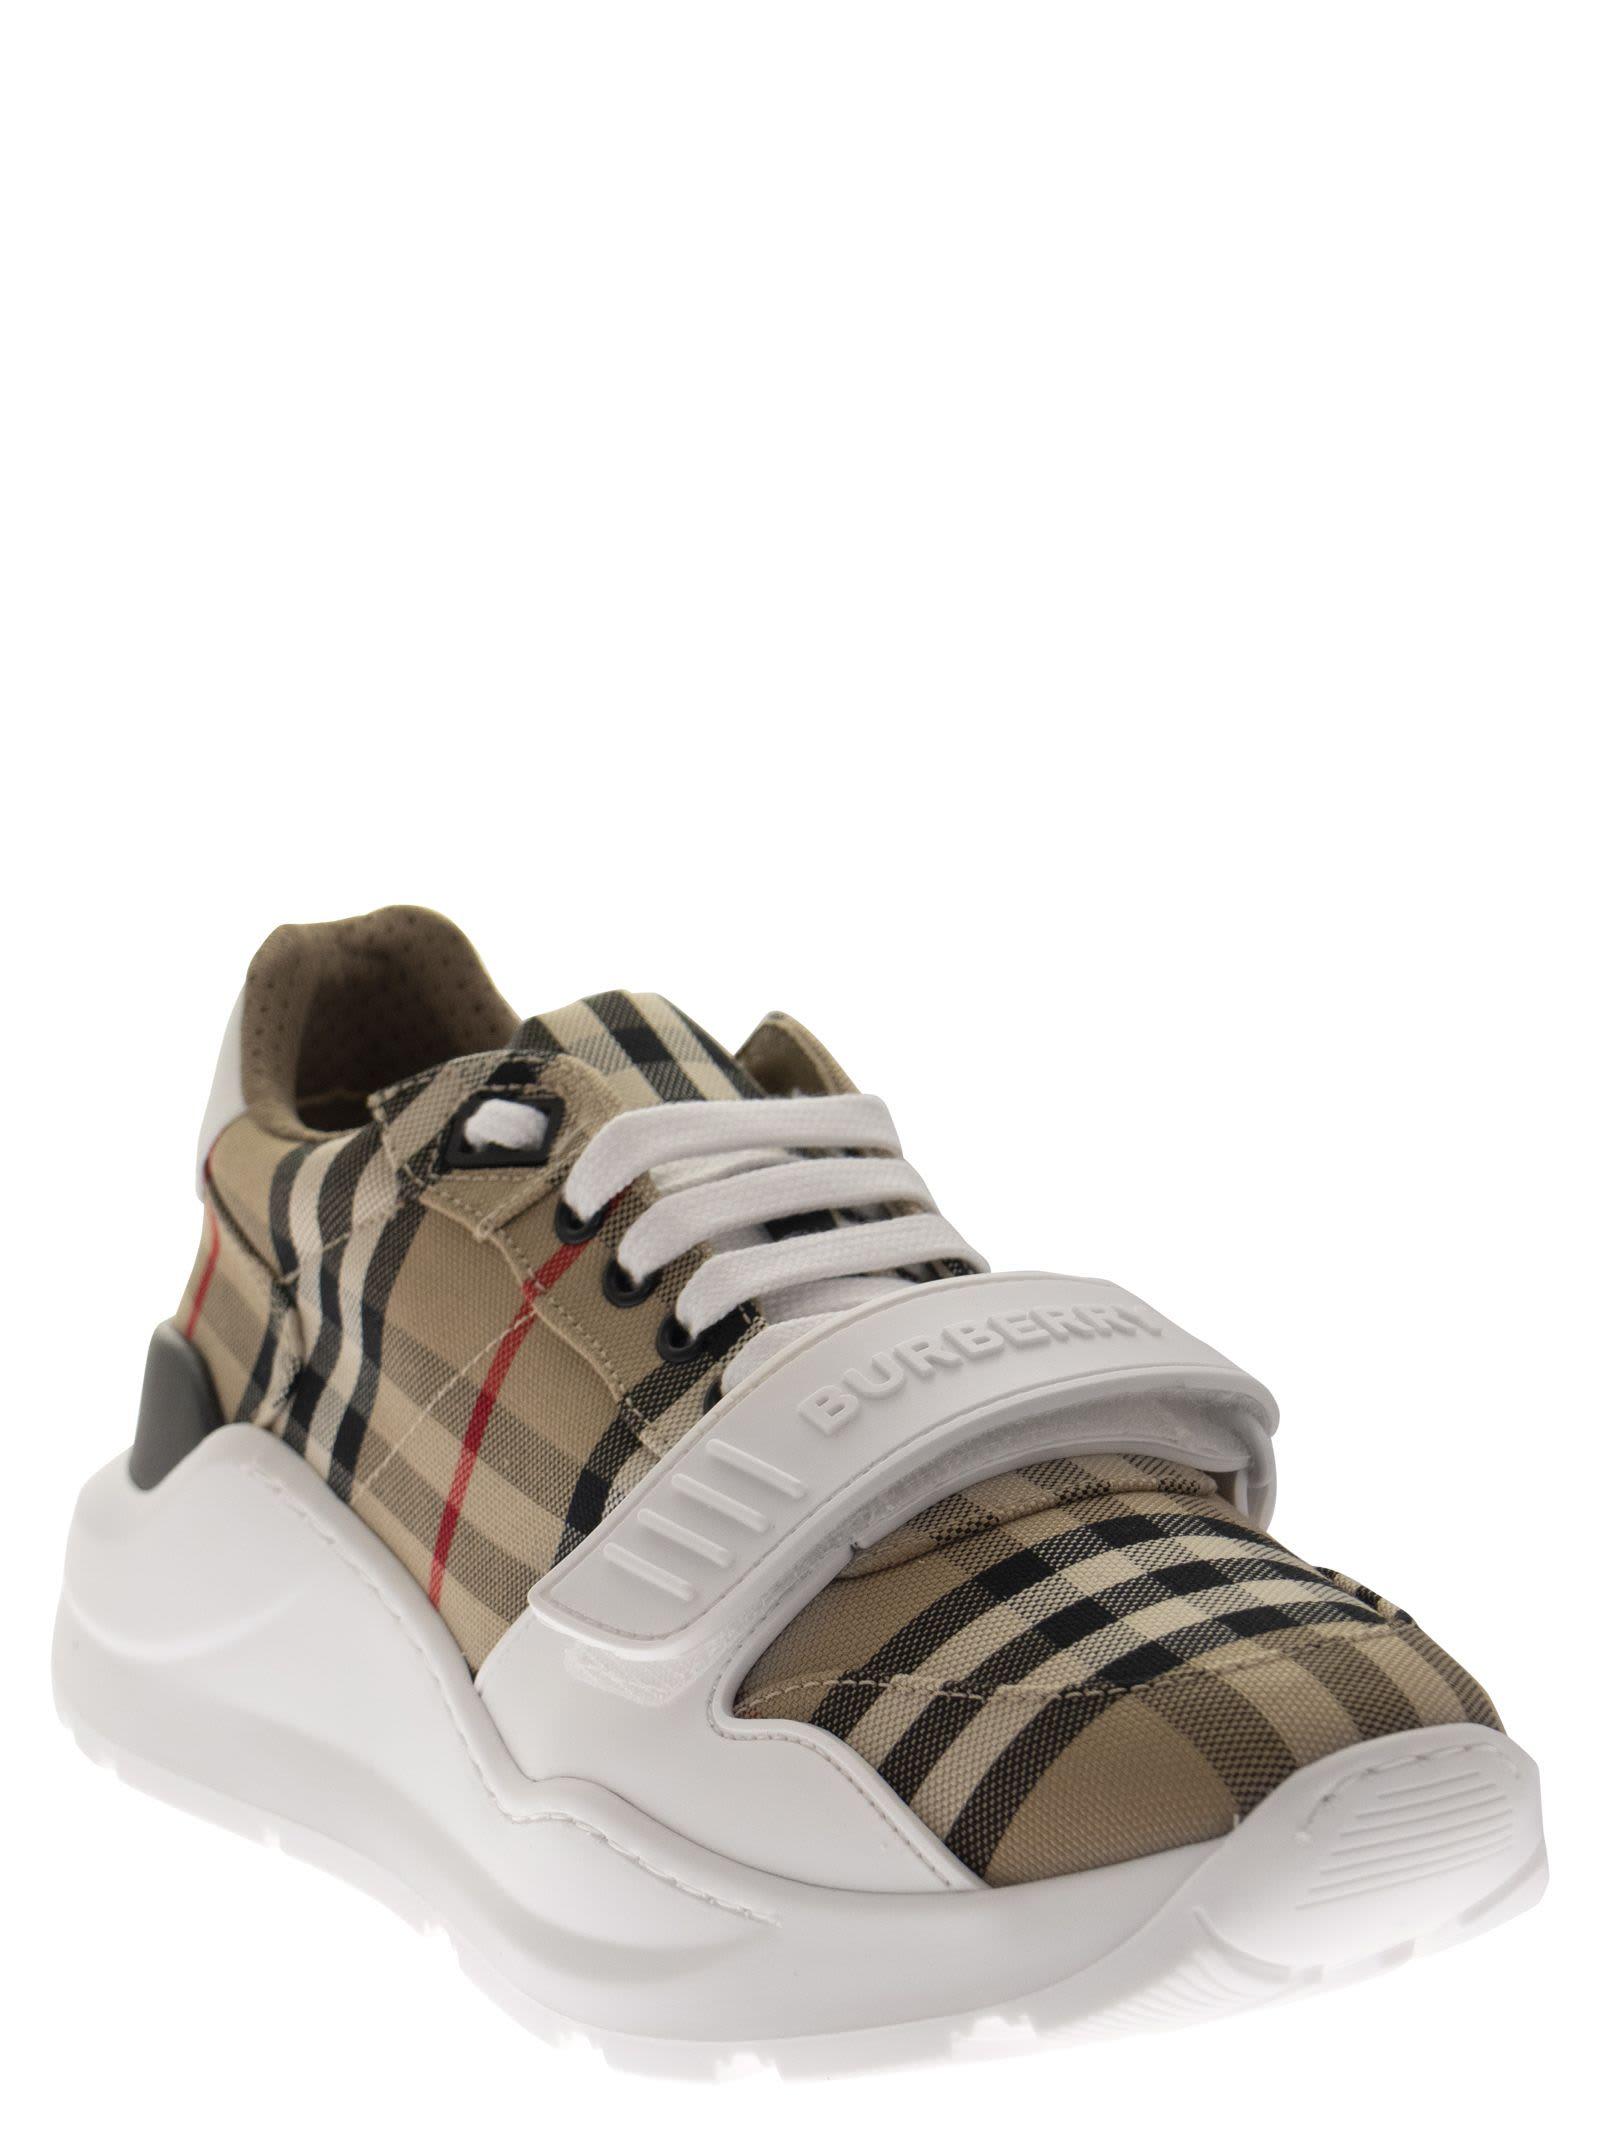 Burberry Leather New Regis - Sneakers | Lyst